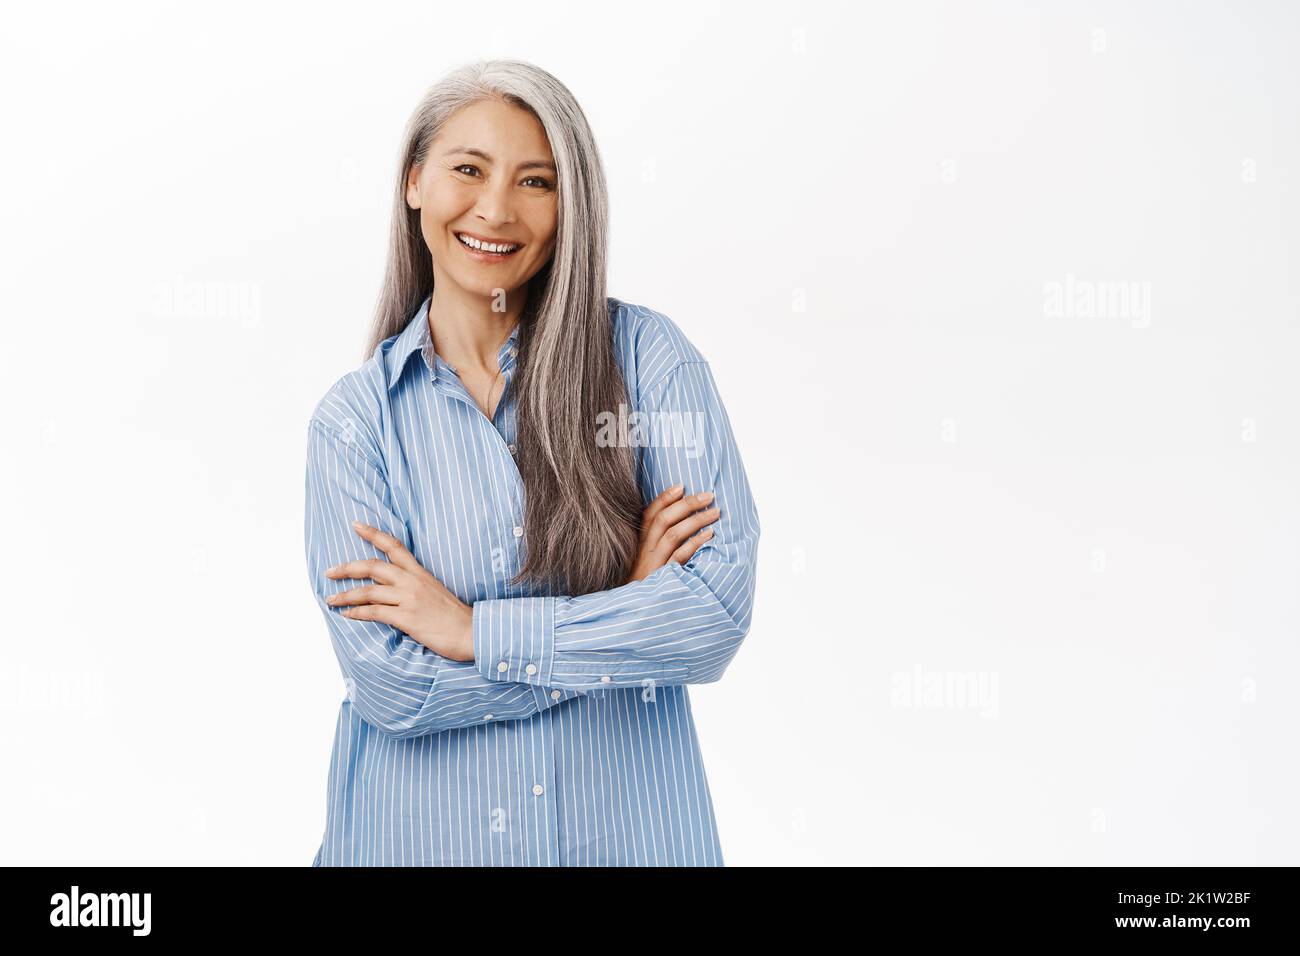 Smiling asian woman, senior lady looking with confidence, standing in power pose against white studio background. Stock Photo